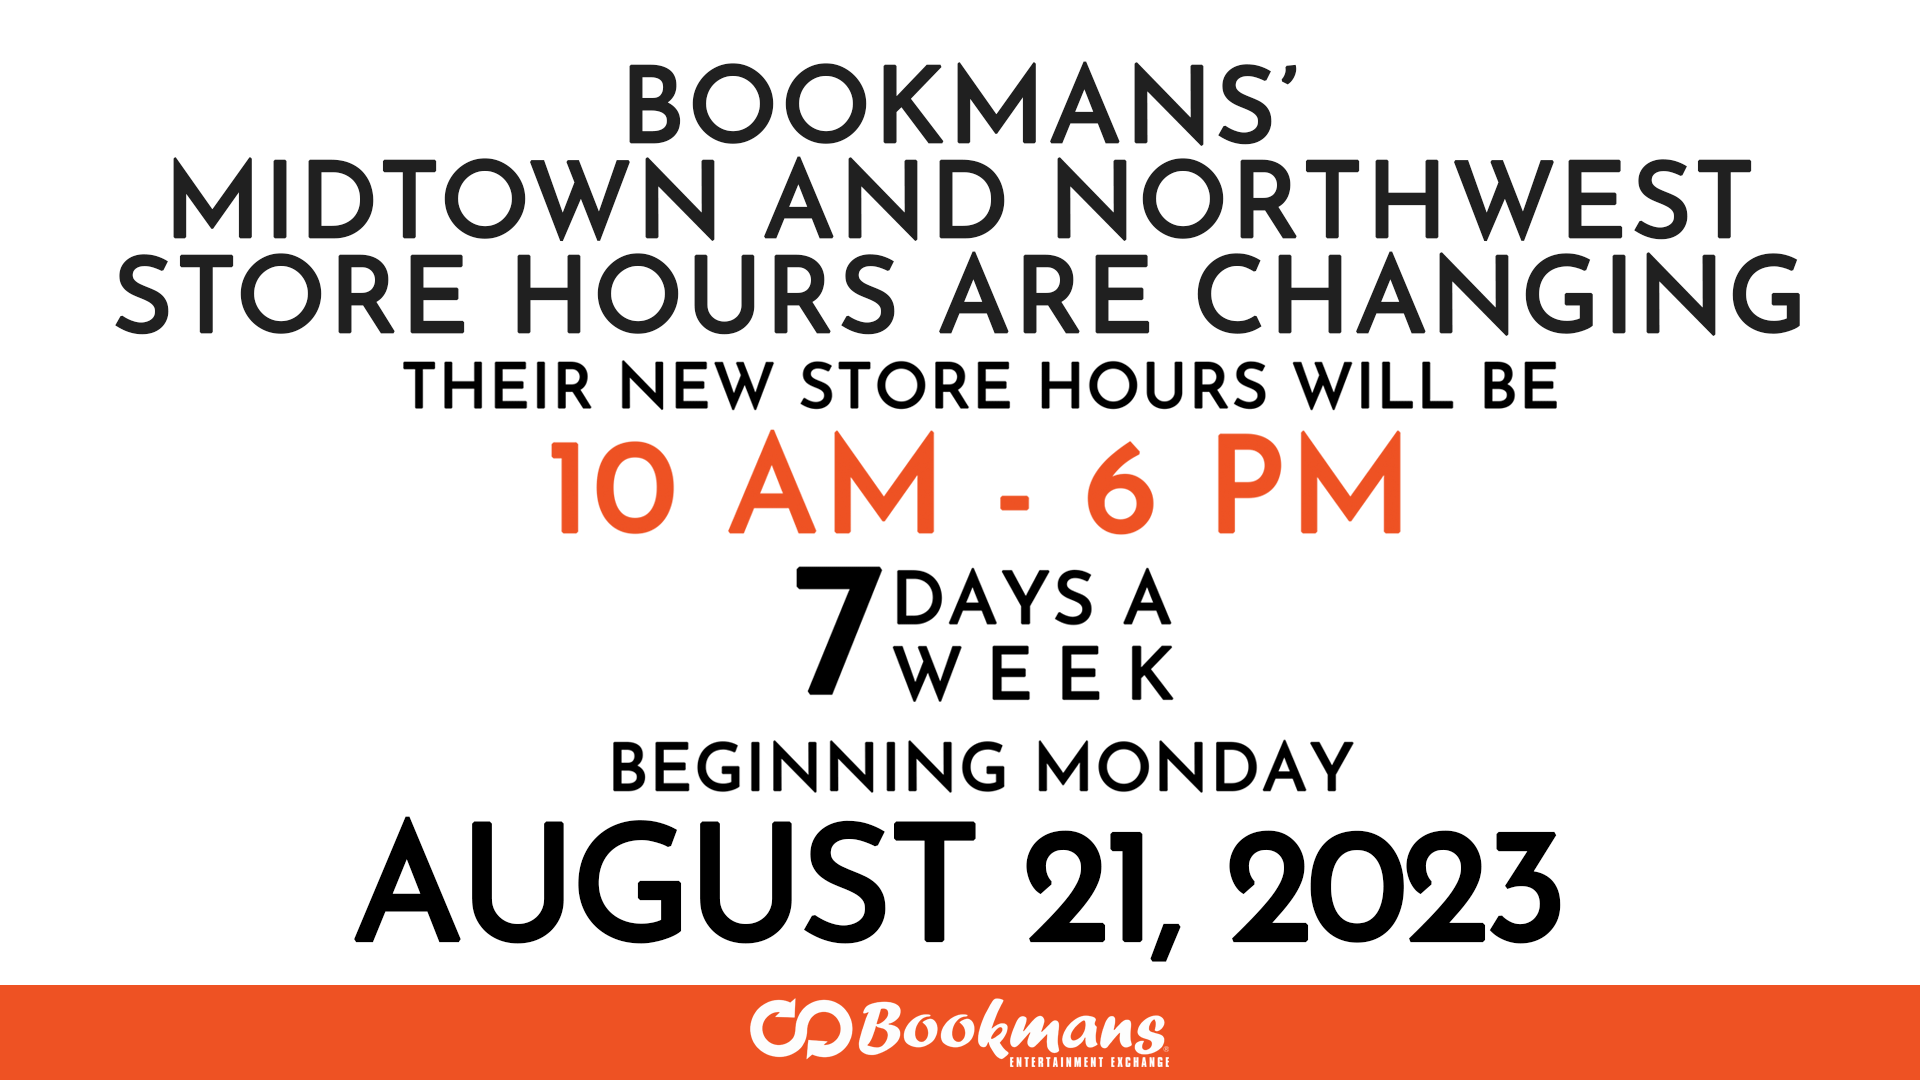 BOOKMANS’ midtown AND northwest STORE HOURS ARE CHANGING BEGINNING AUGUST 21ST. NEW STORE HOURS FOR BOOKMANS' MIDTOWN AND NORTHWEST STORES WILL BE 10 AM TO 6 PM BEGINNING AUGUST 21, 2023.